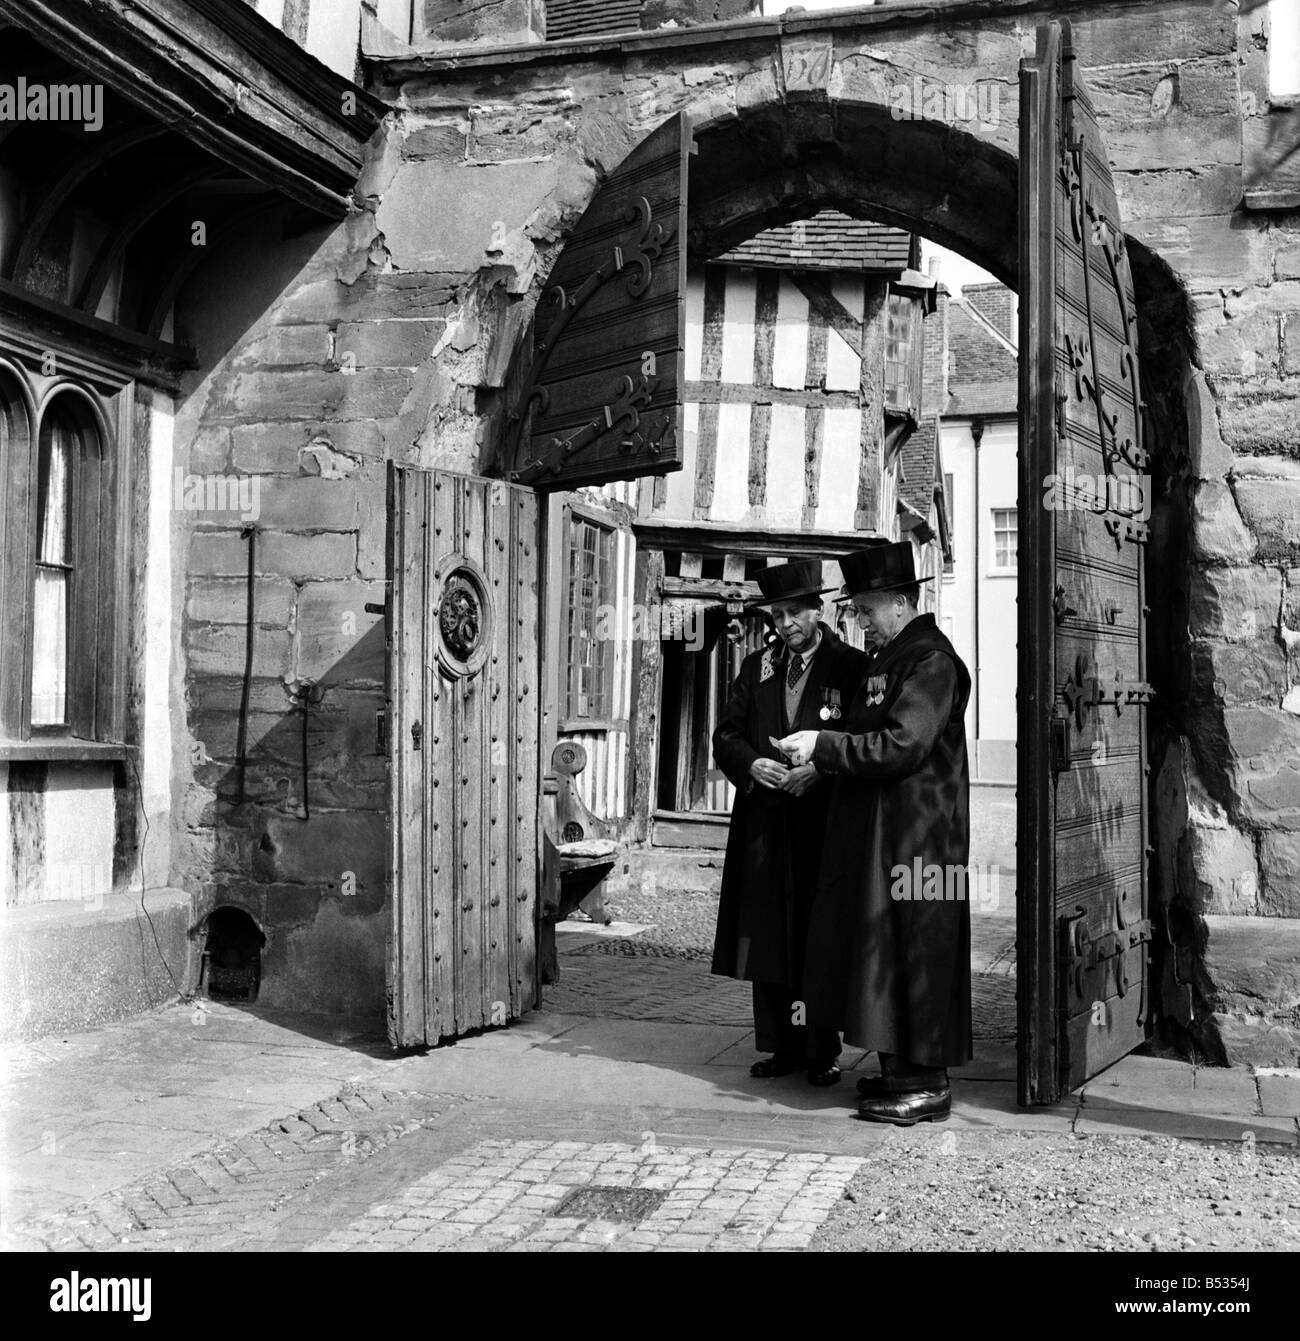 Lord Leycester Hospital a delightful and historic group of 14th century timber-framed buildings, Warwick. October 1952 C4989-001 Stock Photo